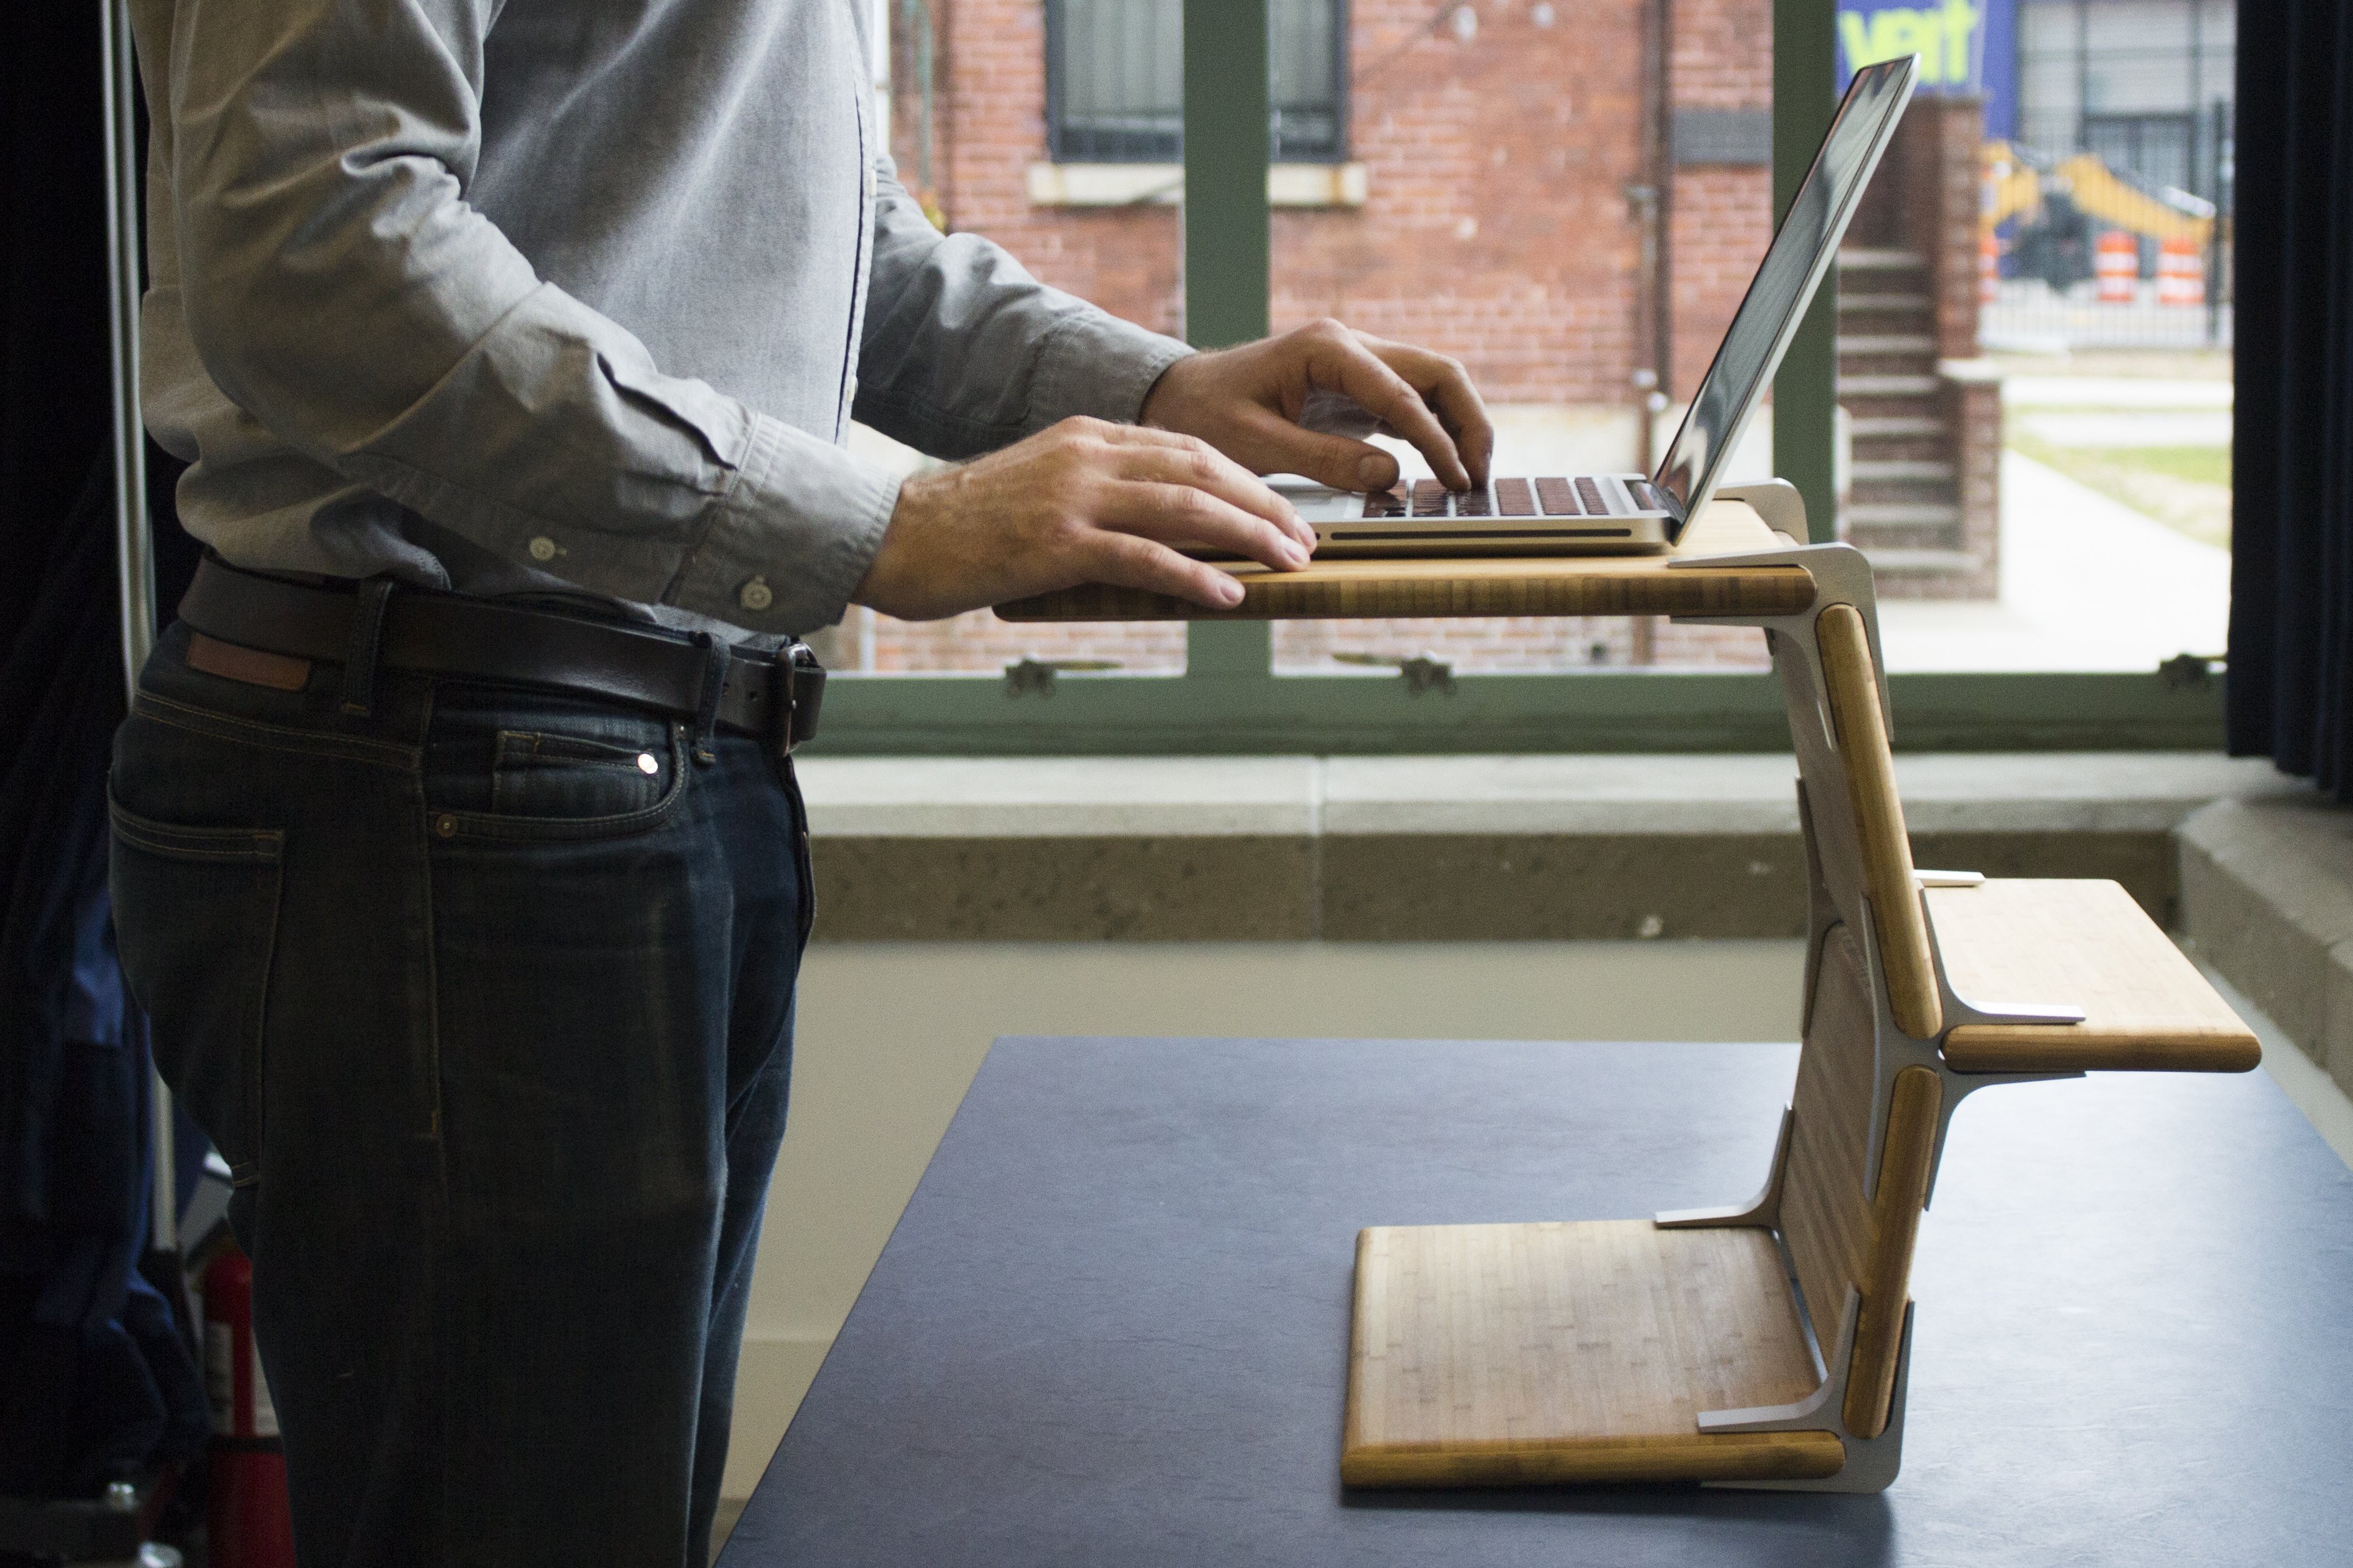 Modos Standing Desk side view with man using